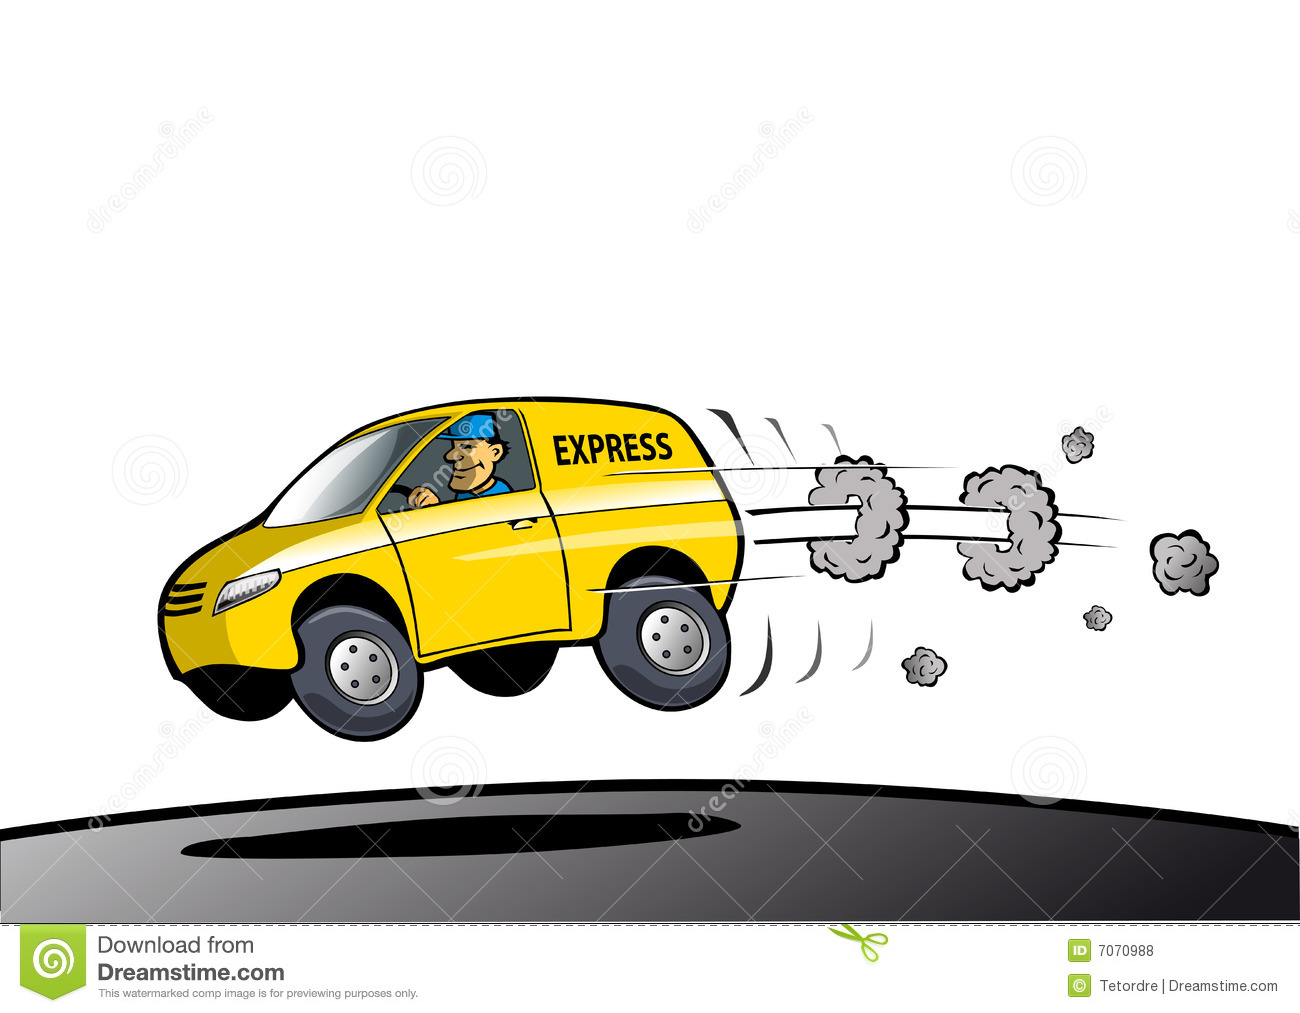 Fast Delivery Service Royalty Free Stock Photos   Image  7070988